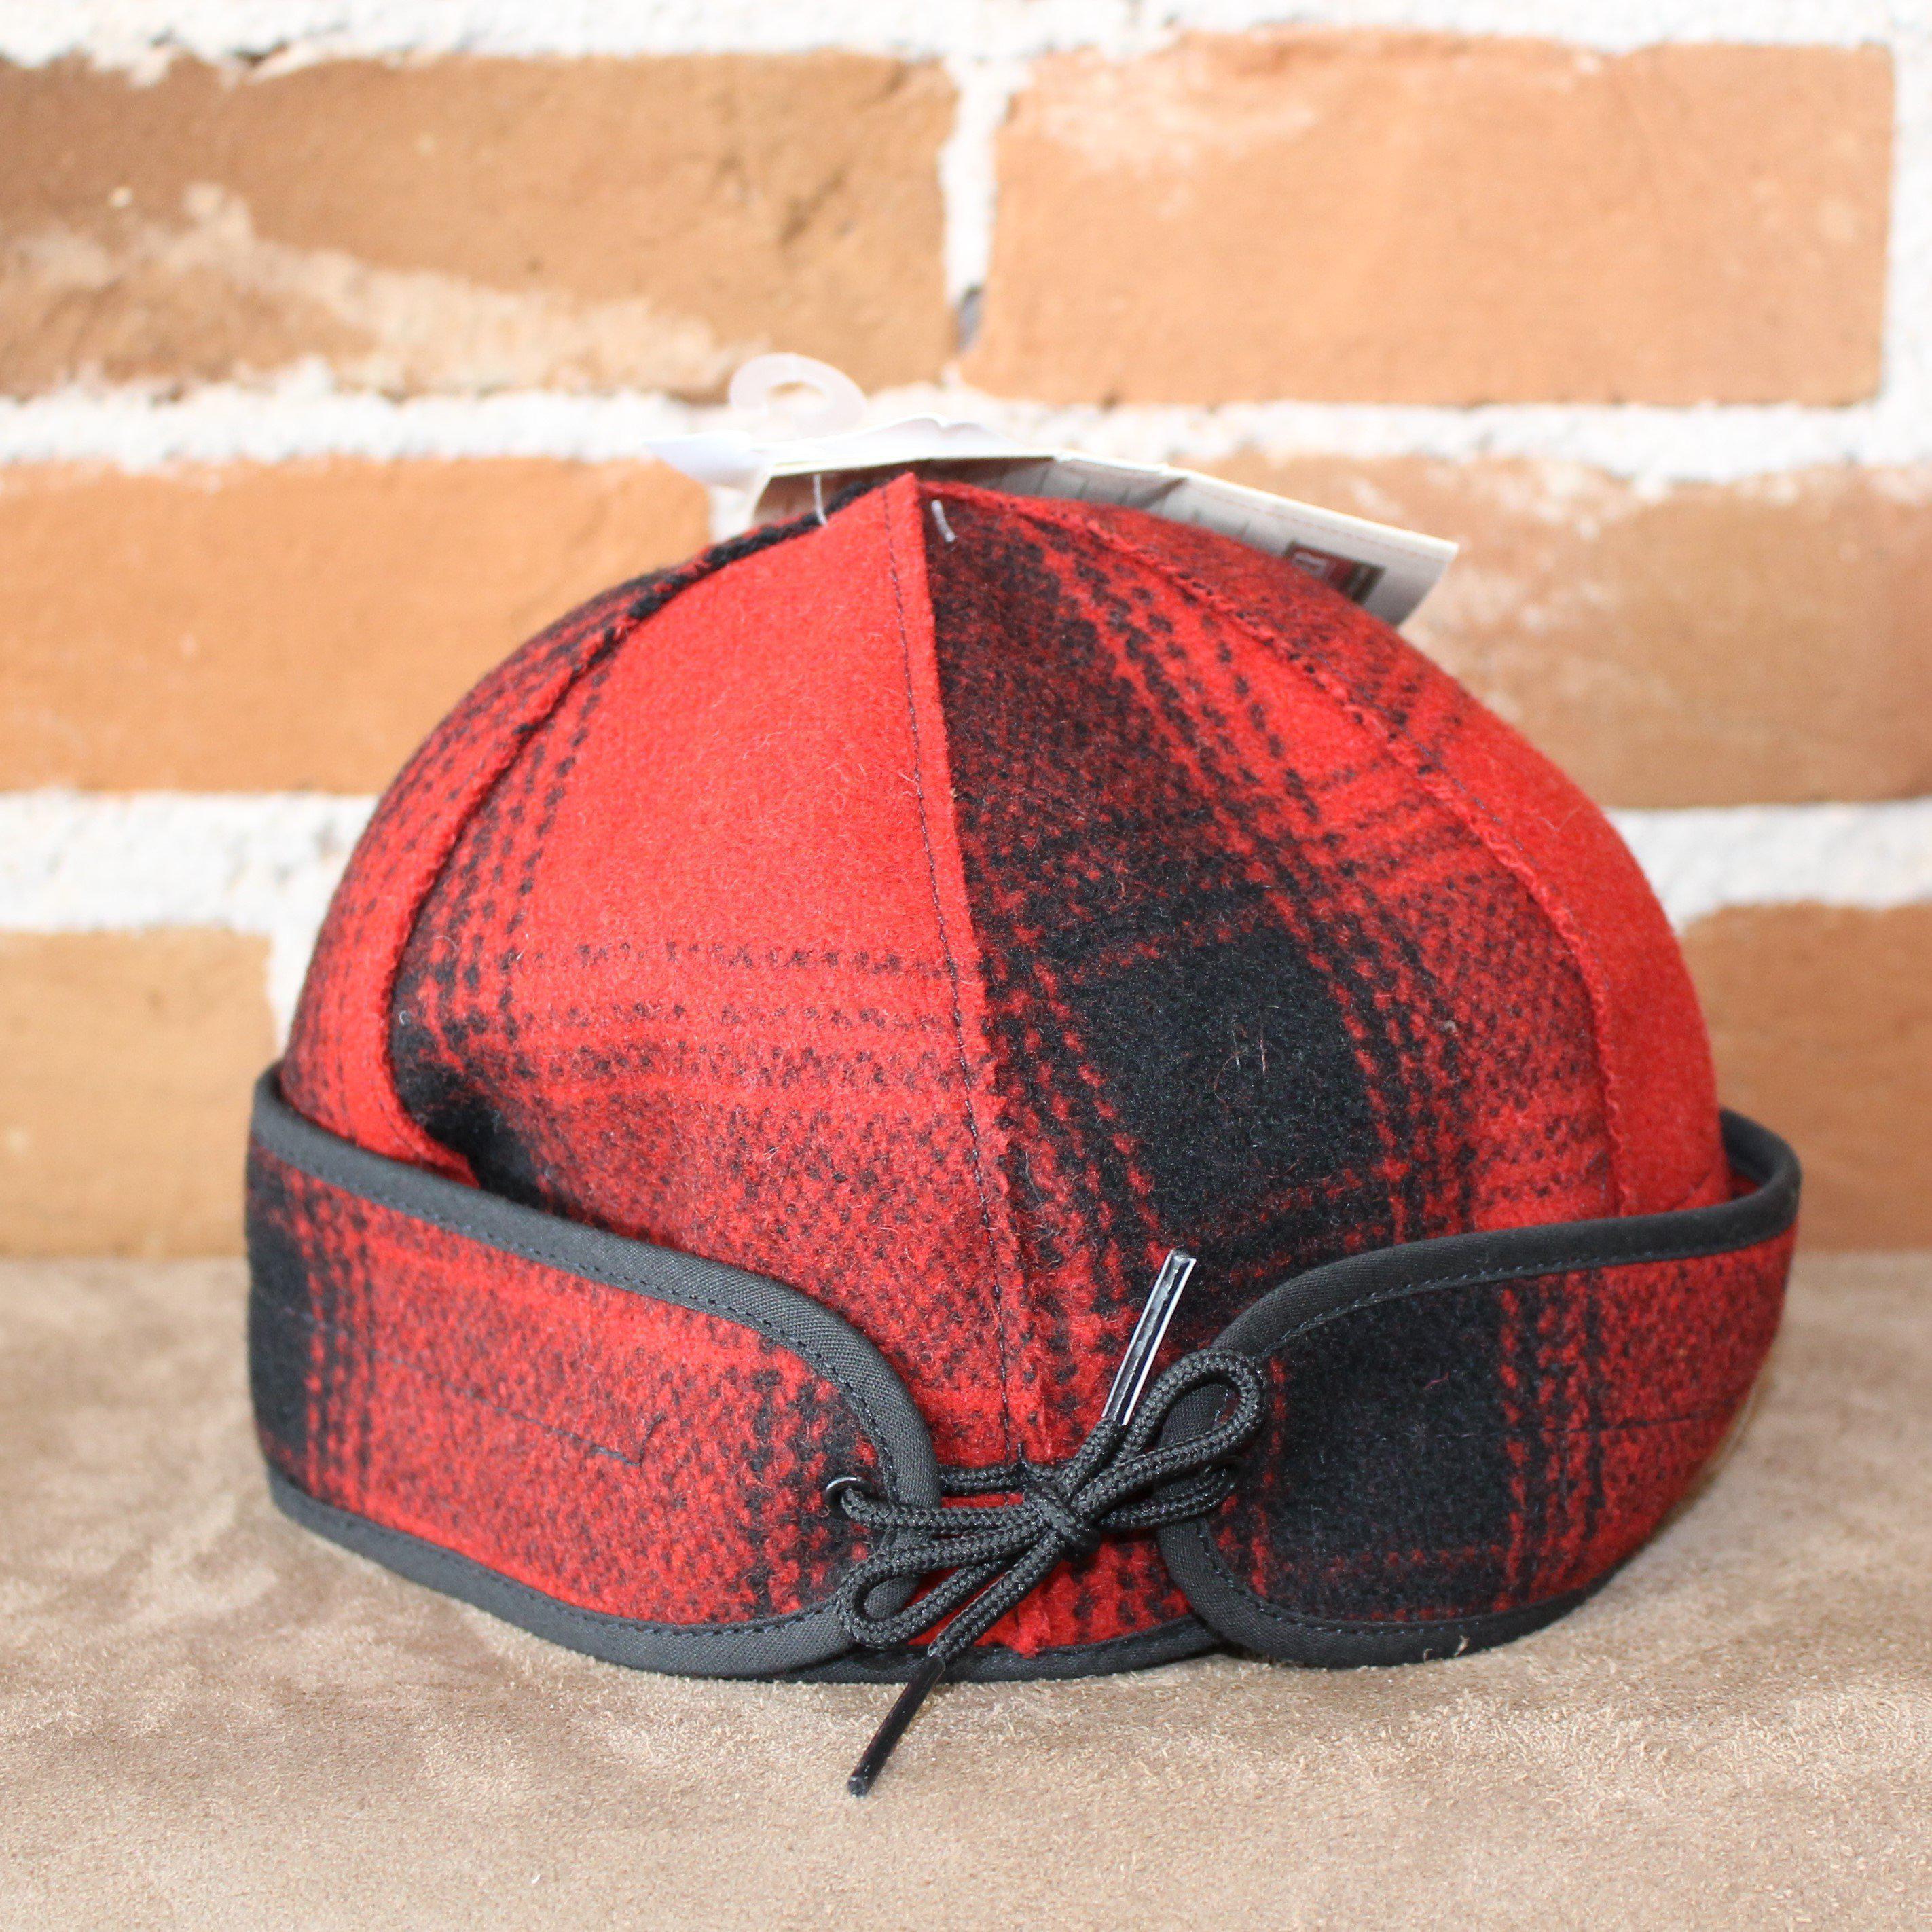 Brimless Cap In Red And Black Plaid – Atomic 79